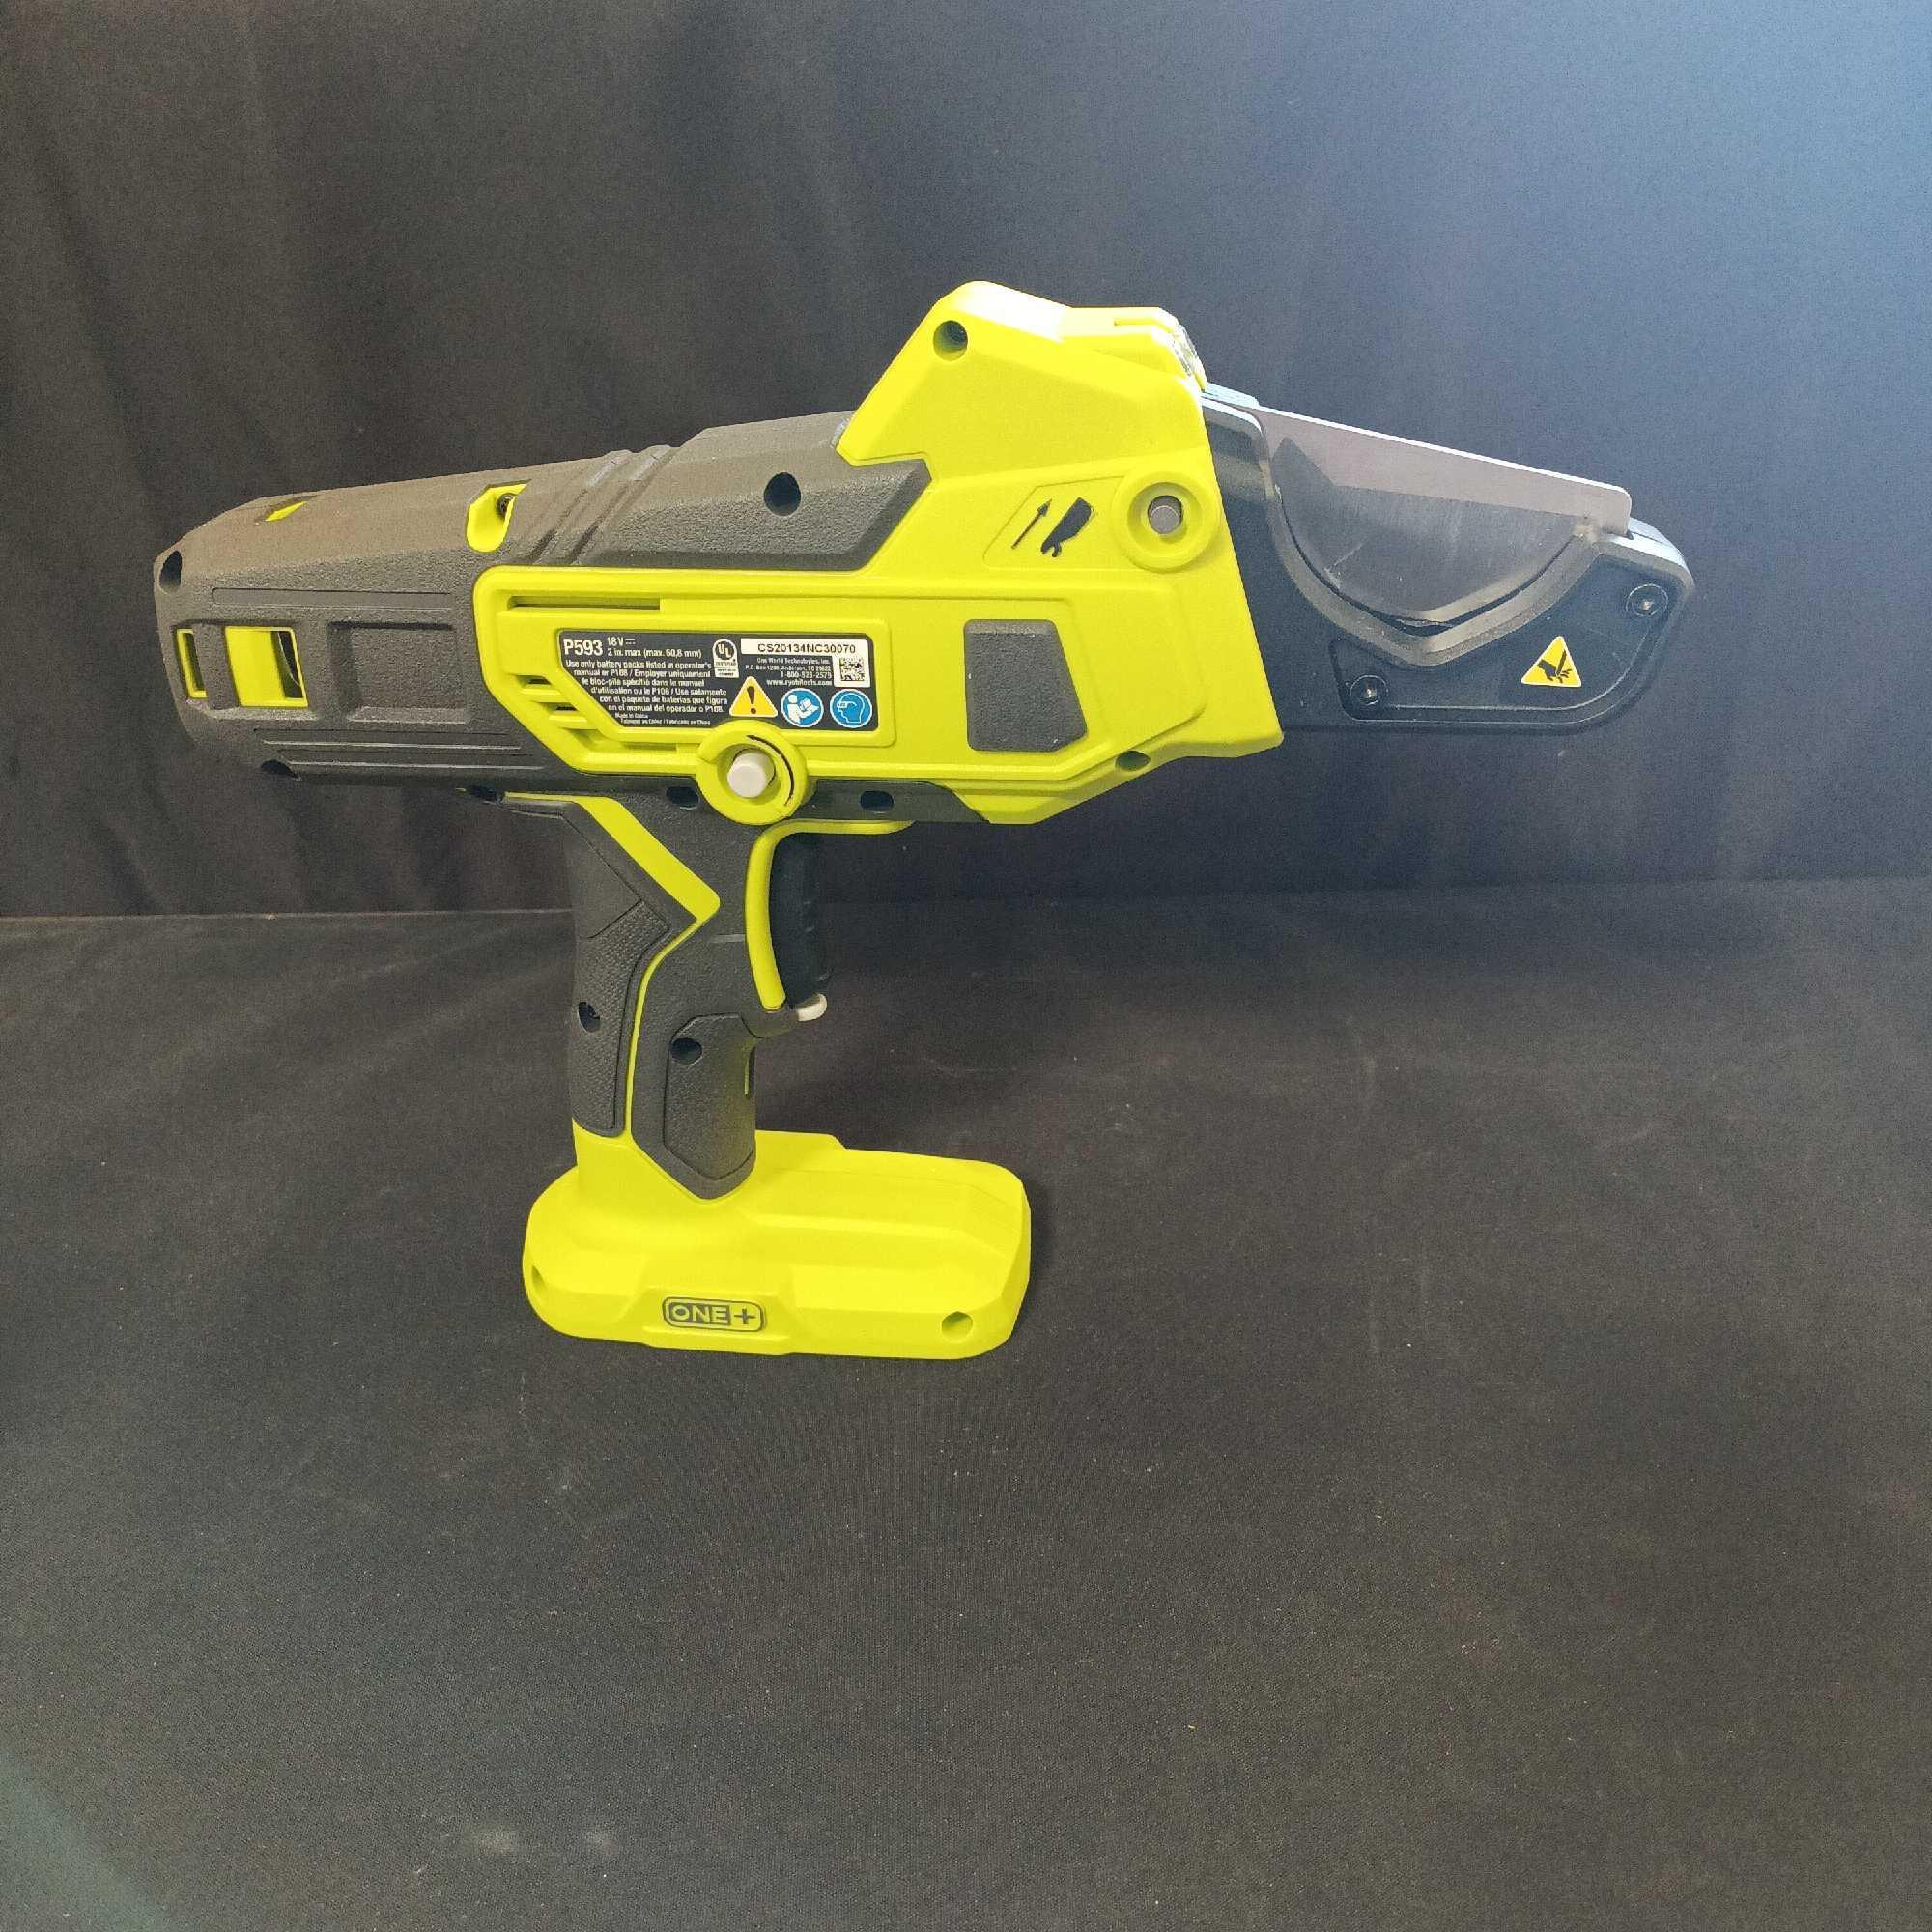 Ryobi 18-Volt ONE+ Lithium-Ion Cordless PVC and PEX Cutter (Tool Only)